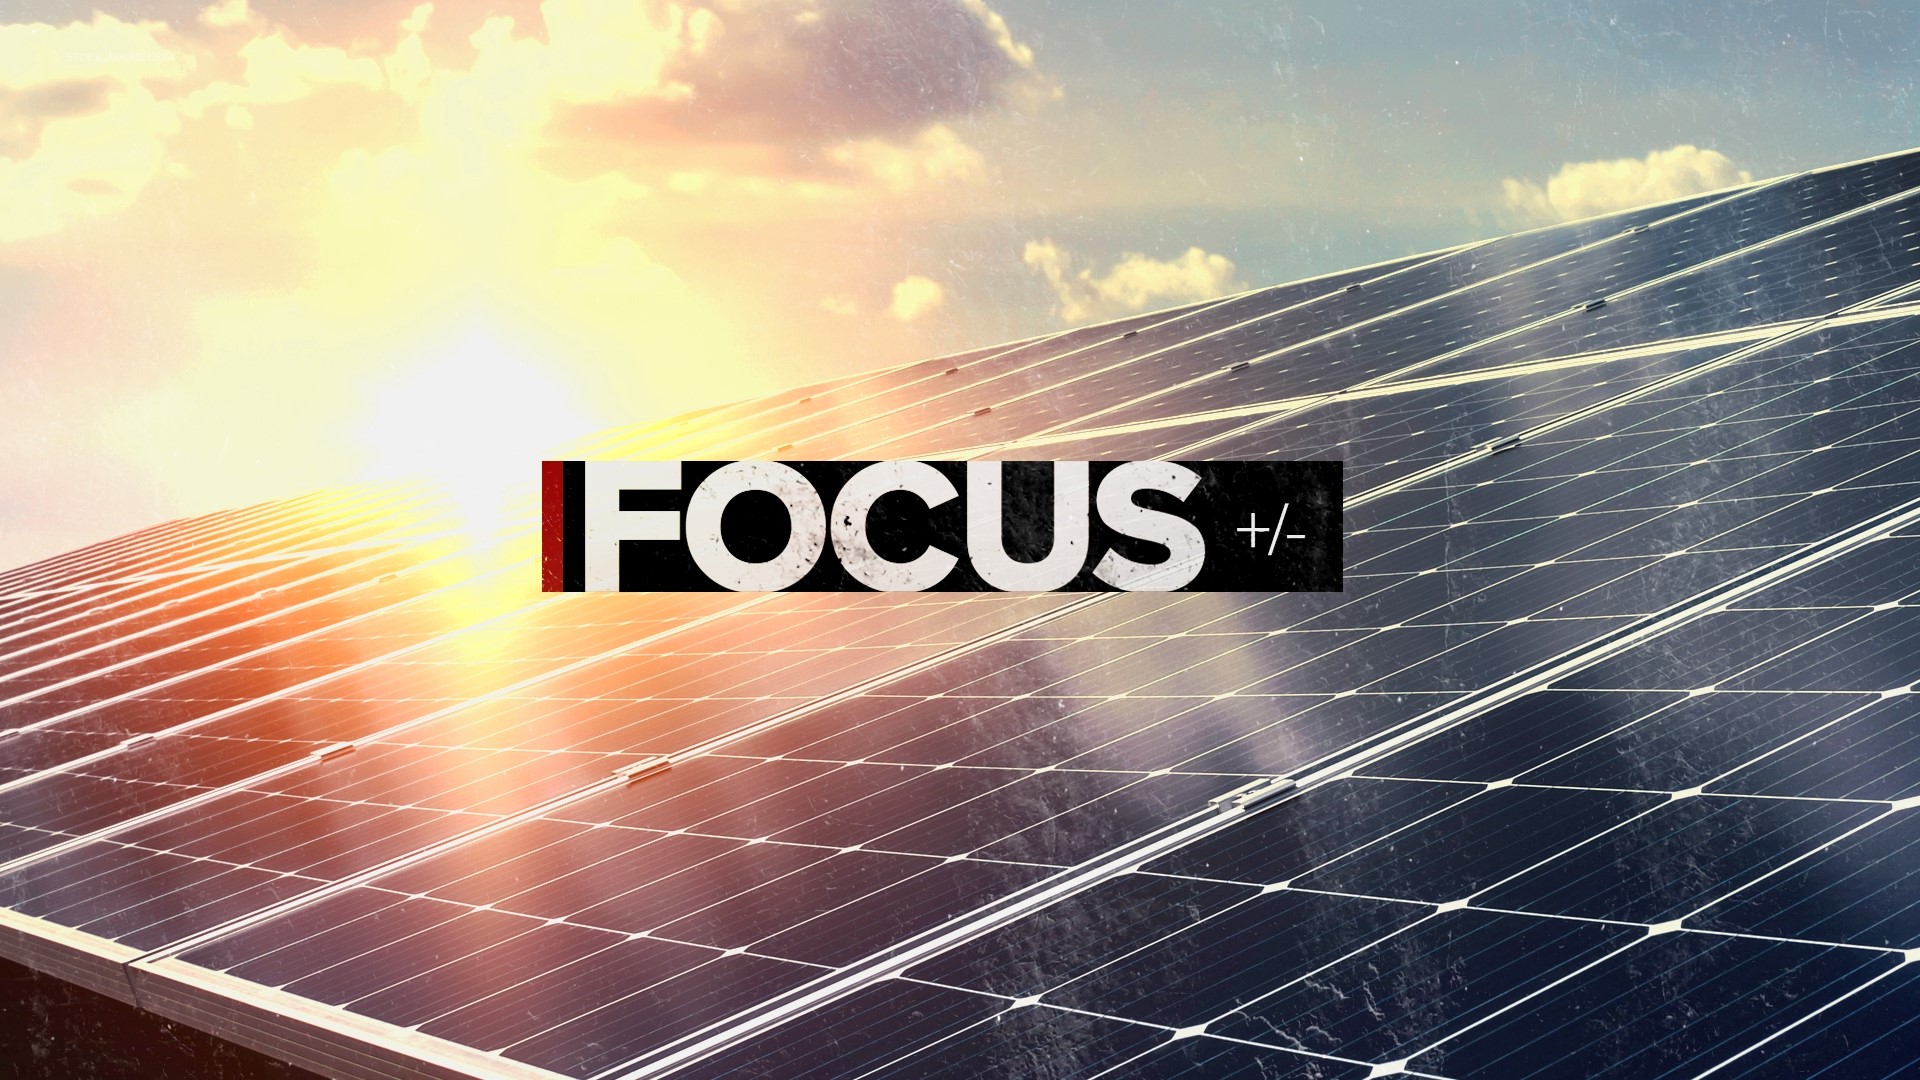 FOCUS investigator John Charlton explains how complaints against one solar panel company have grown since our reports first aired.